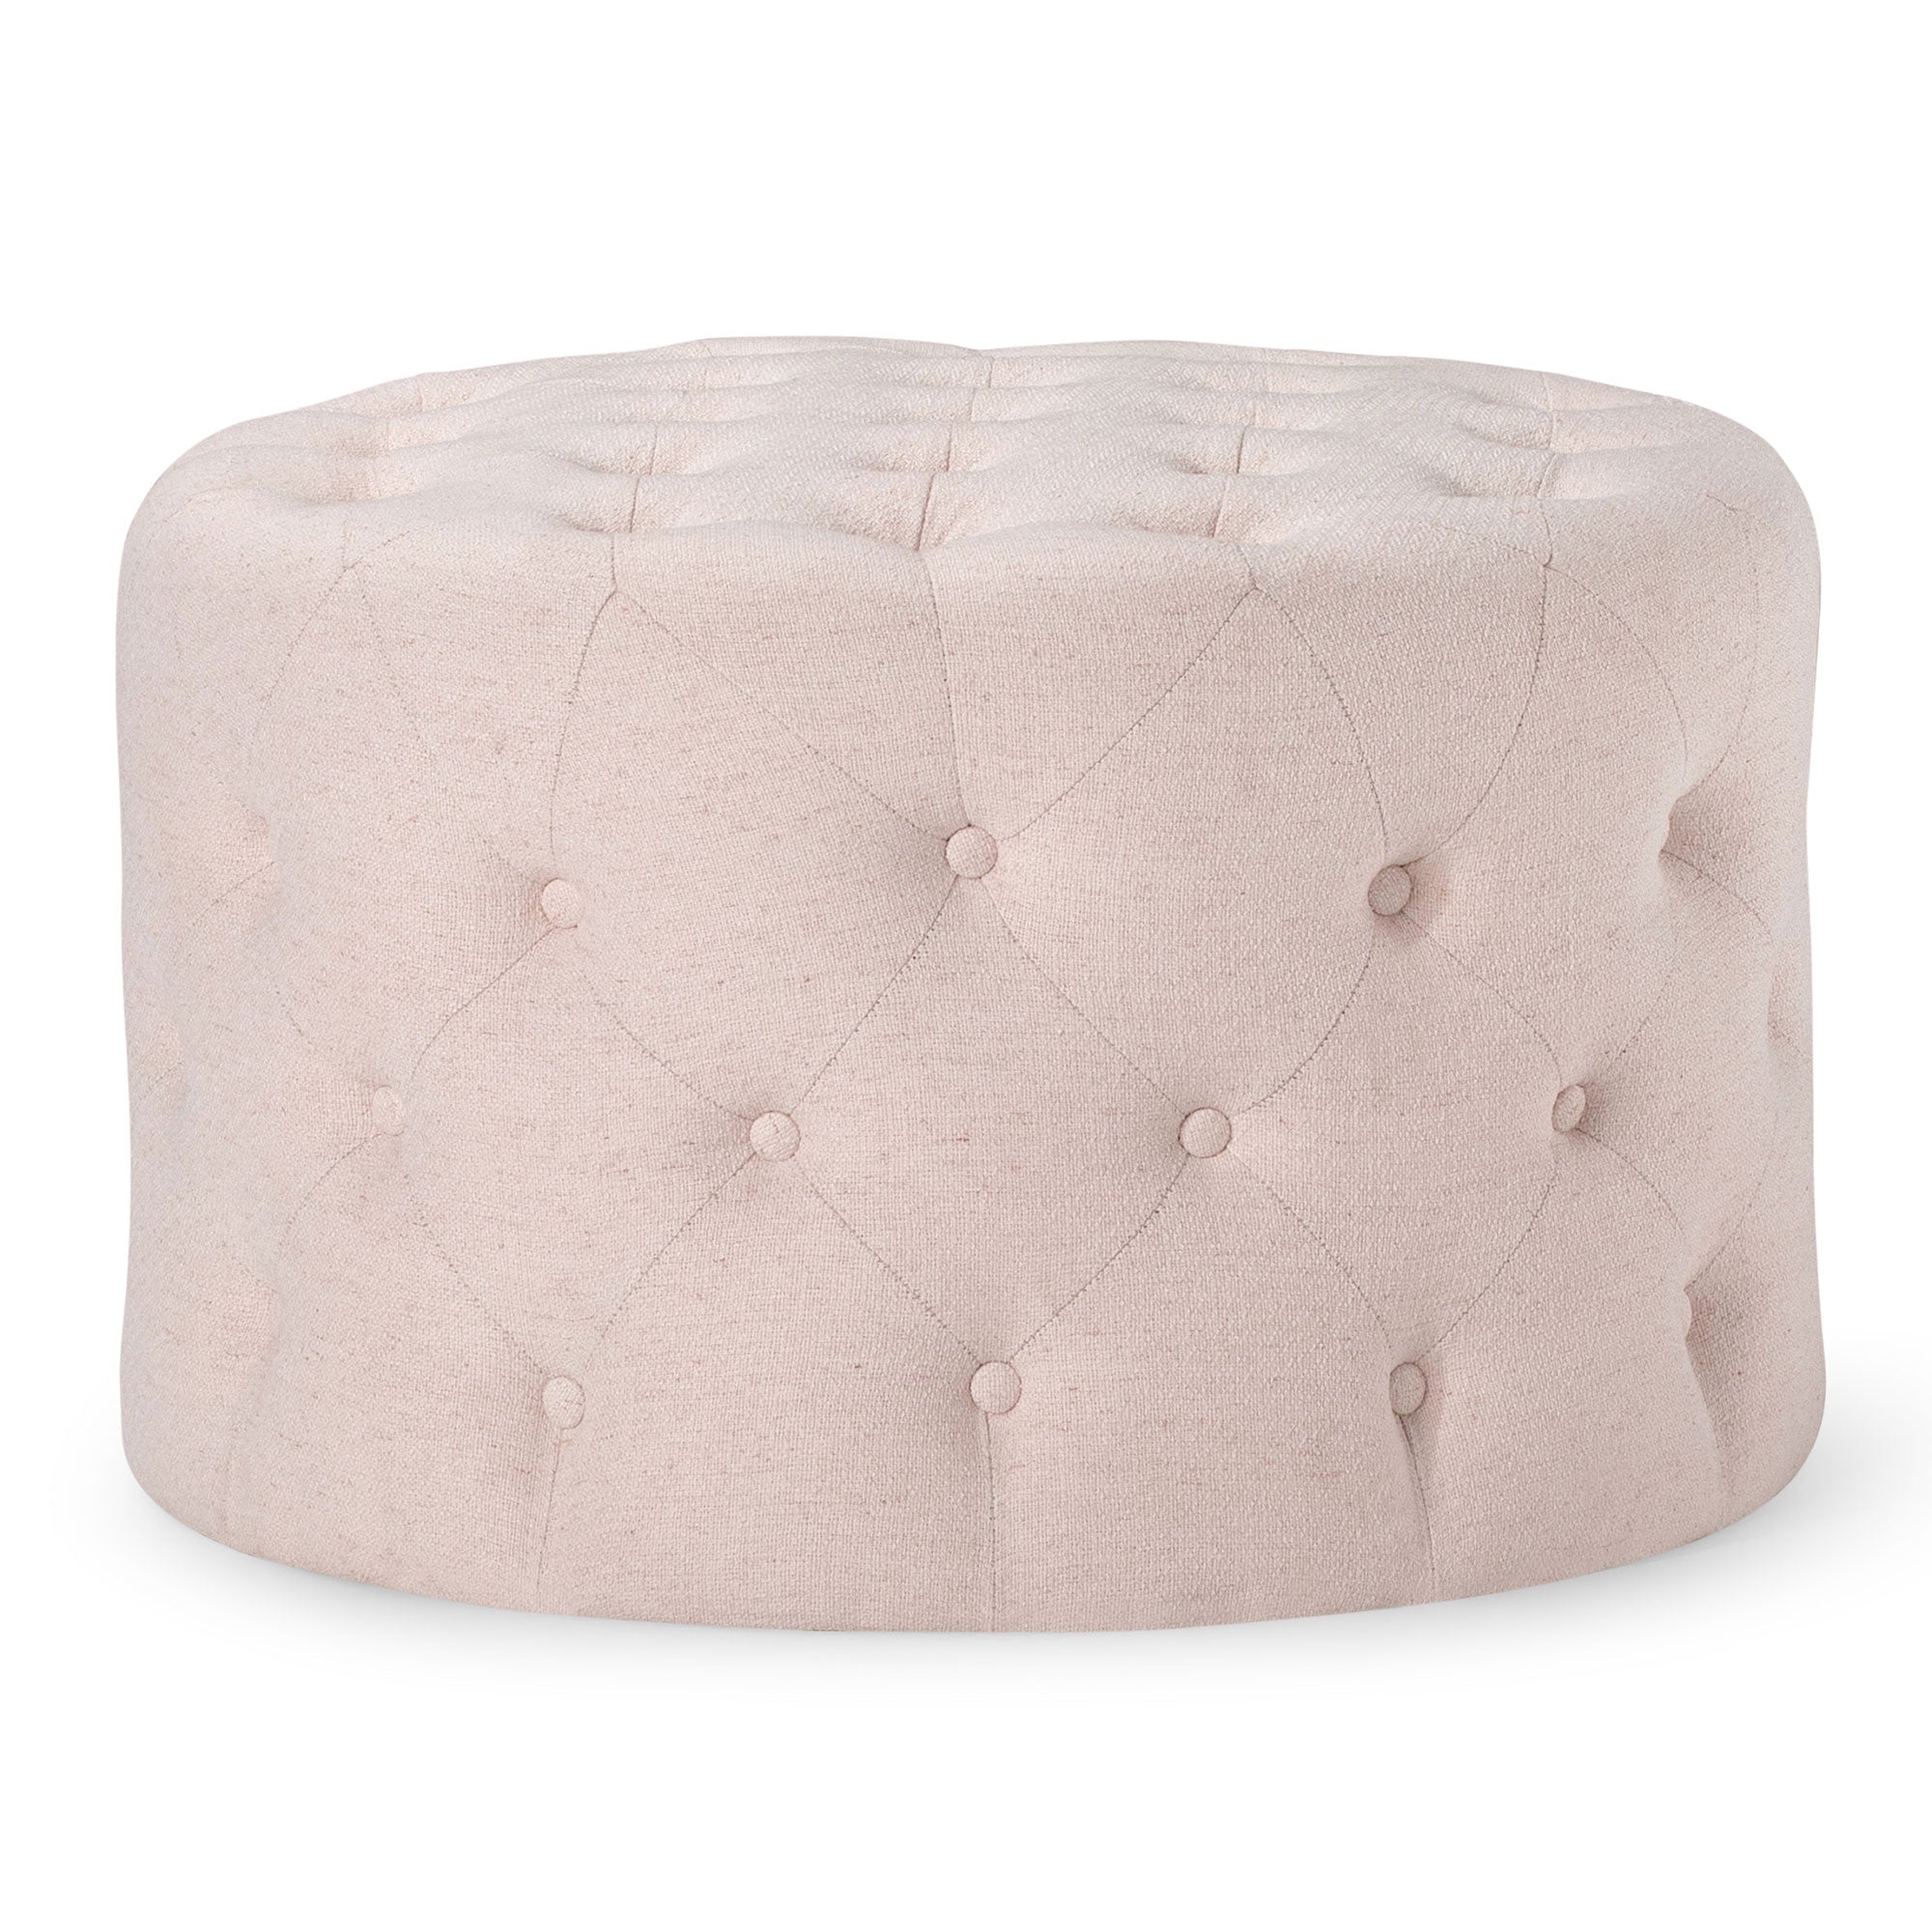 Marcy Classical Round Ottoman in Cream Fabric Upholstery in Ottomans & Benches by Maven Lane